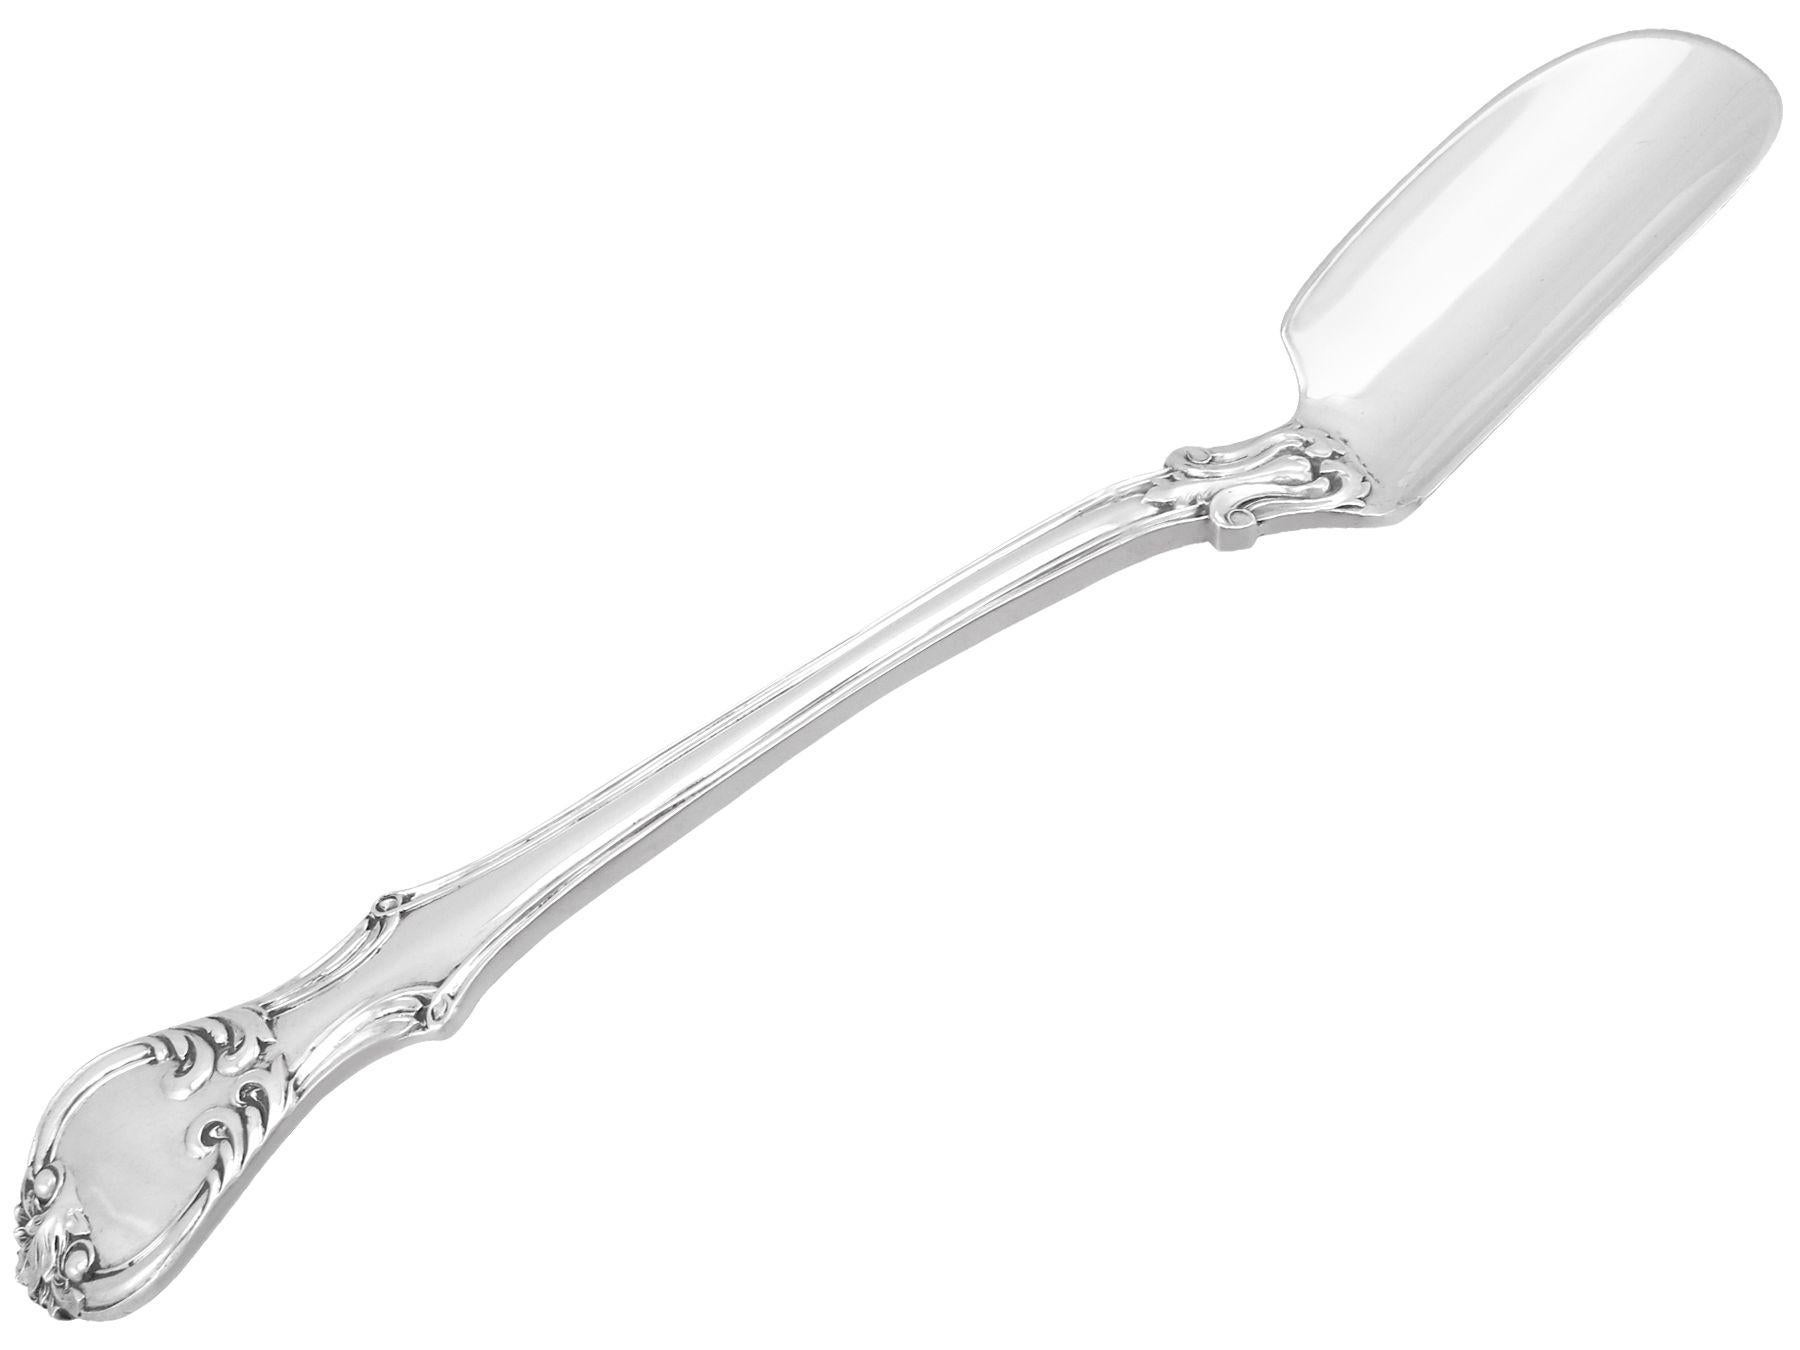 An exceptional, fine and impressive antique Victorian English sterling silver cheese scoop; an addition to our silver cutlery/flatware collection

This exceptional and large antique Victorian sterling silver cheese scoop has been crafted in the